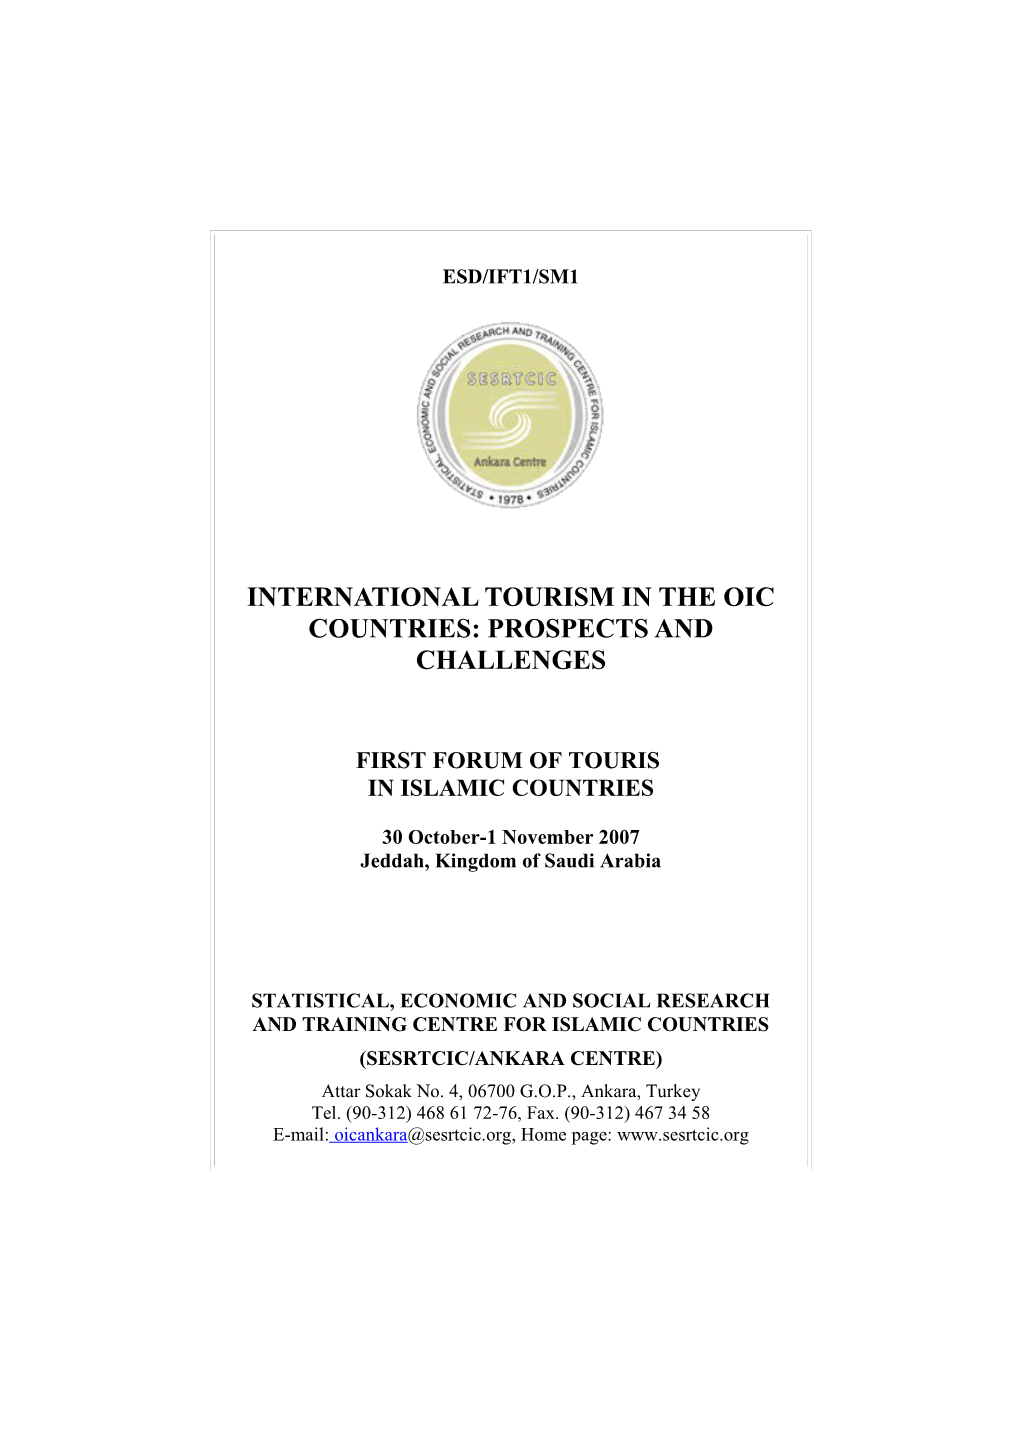 International Tourism in the Oic Countries: Prospects and Challenges